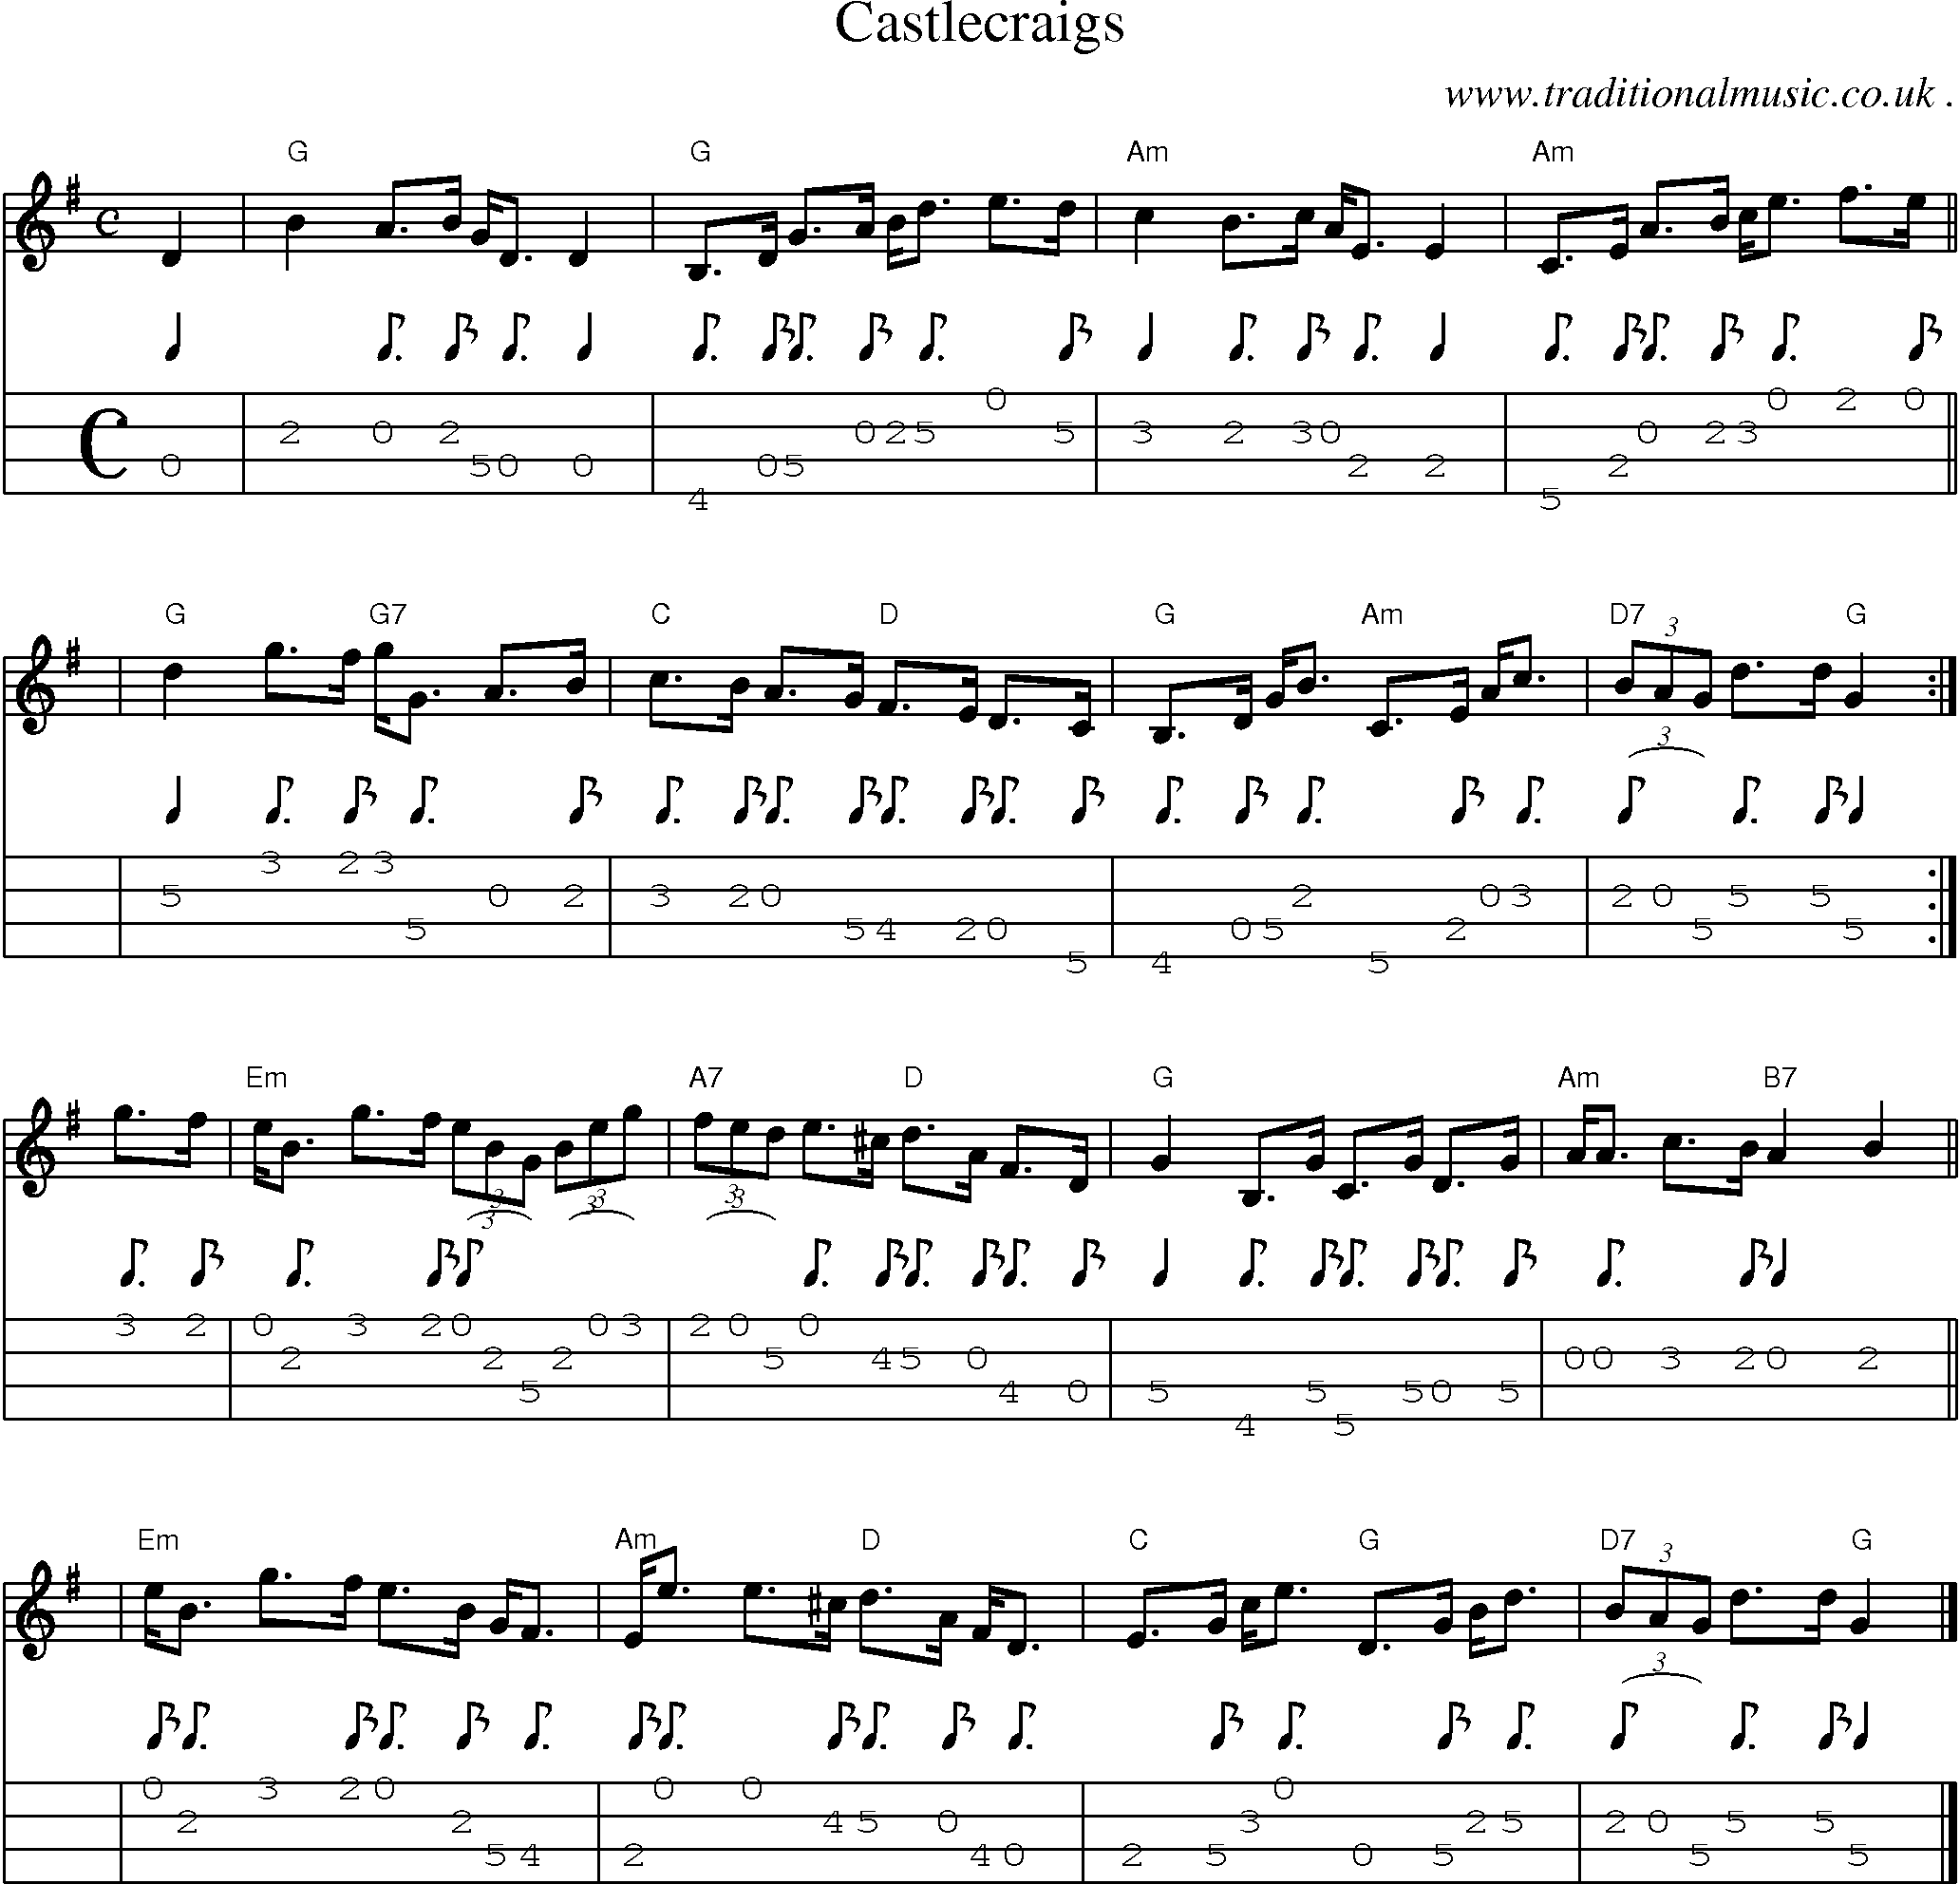 Sheet-music  score, Chords and Mandolin Tabs for Castlecraigs